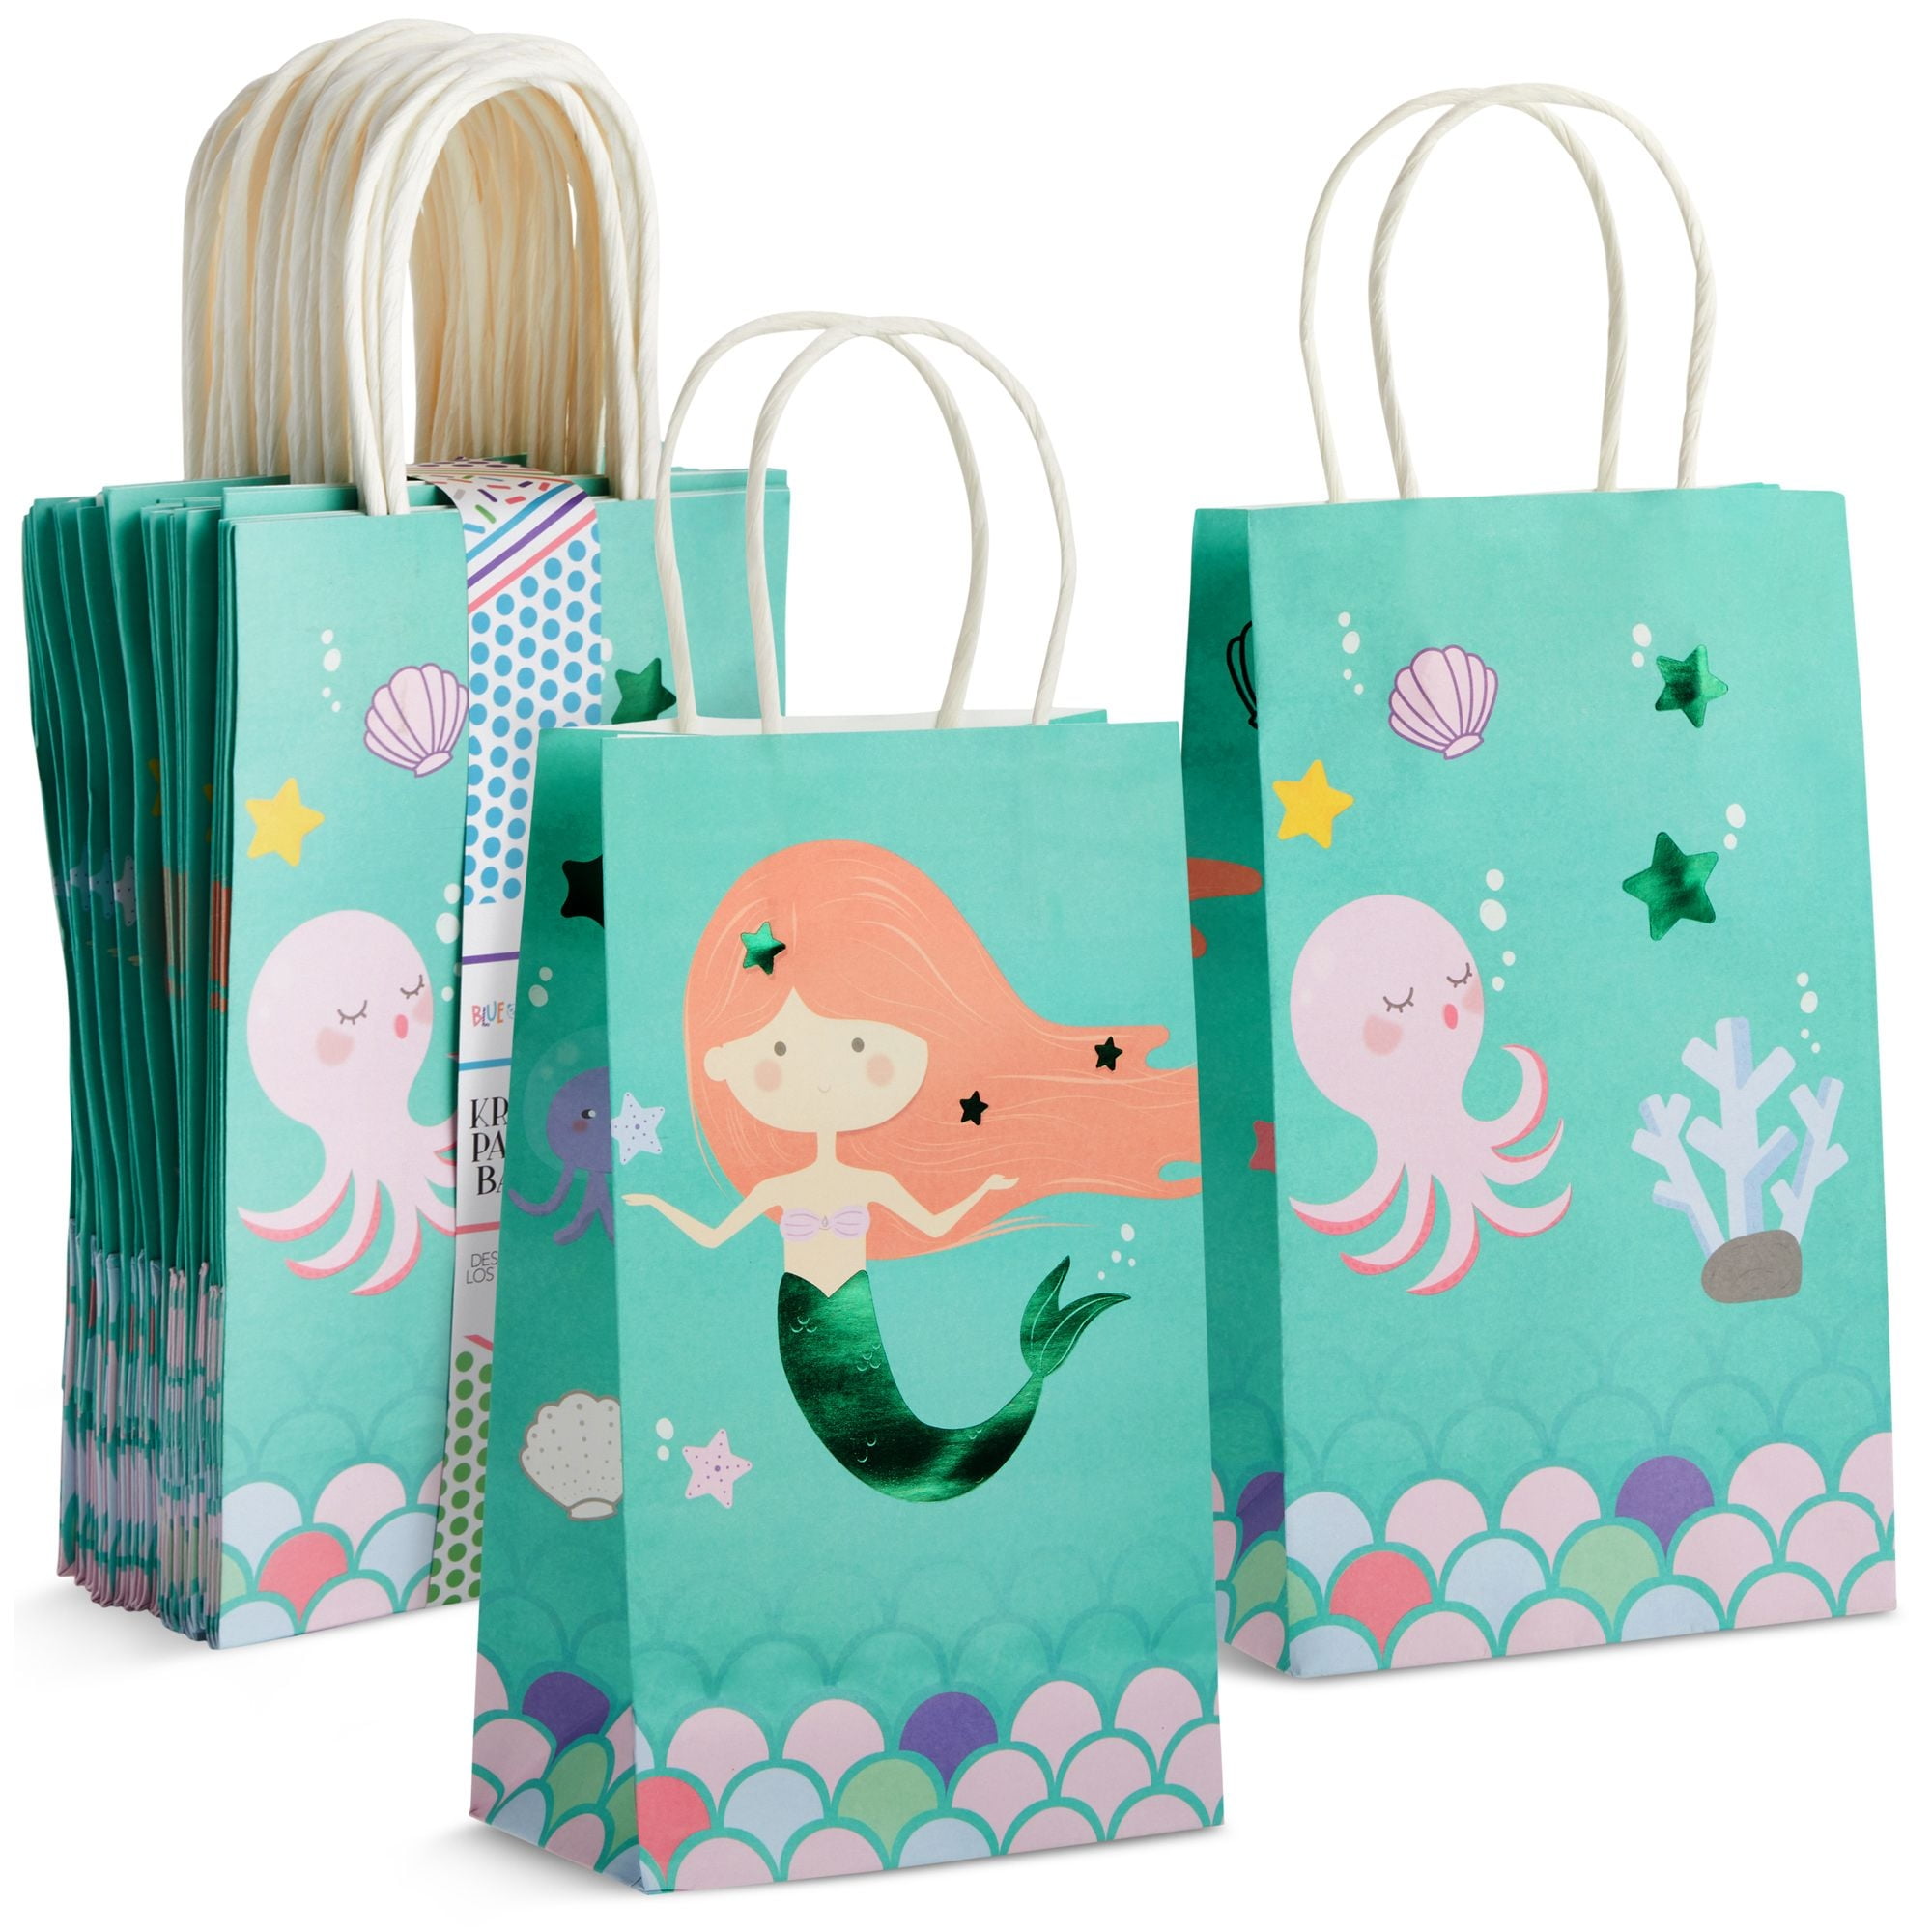  Desi Favors Om Paper Bags - Indian Gifts Bags, Party